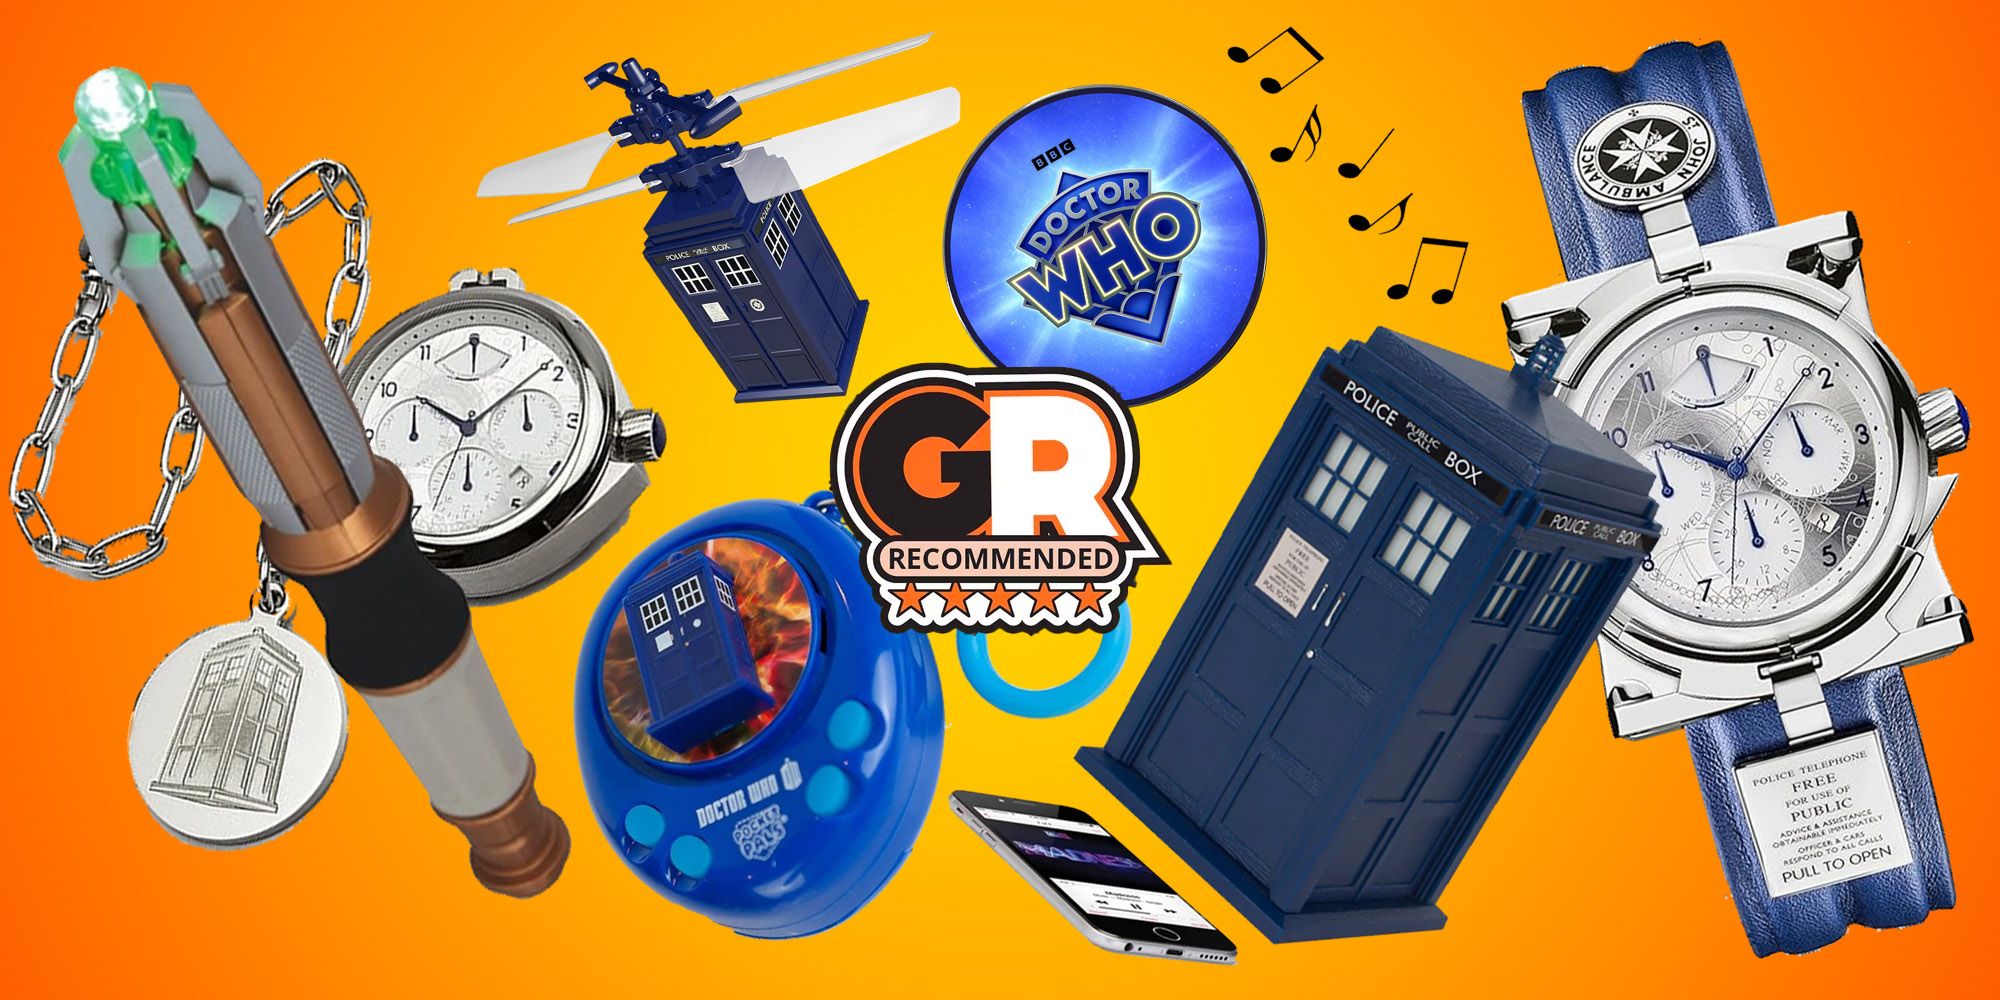 Doctor Who - Sonic Screwdriver keychain - Torch - Goodies - TV